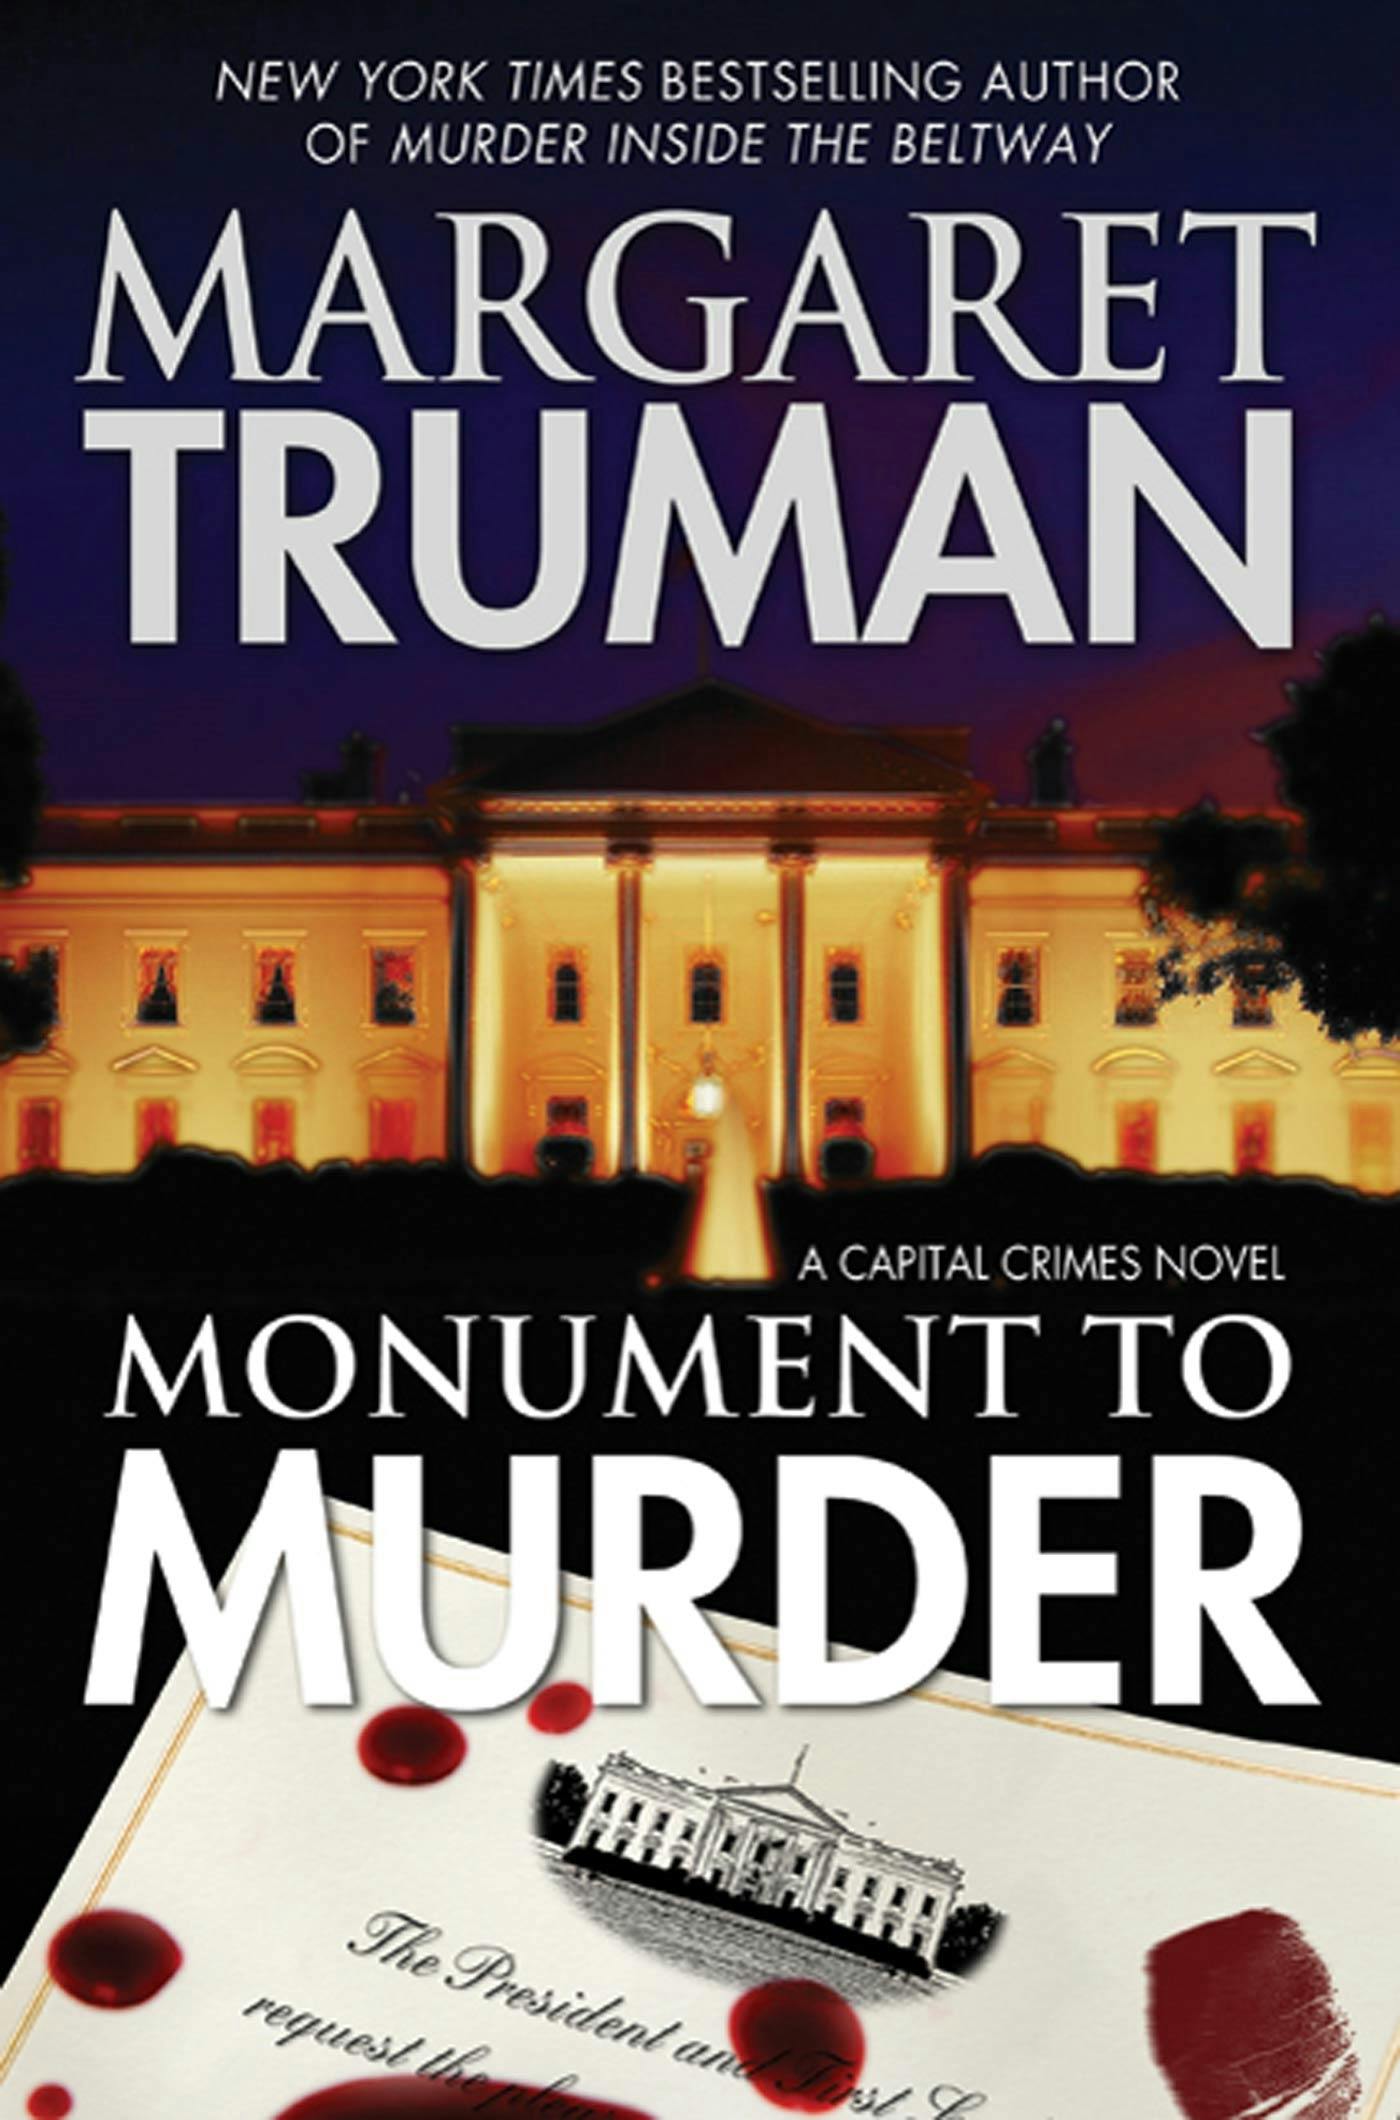 Cover for the book titled as: Monument to Murder: A Capital Crimes Novel